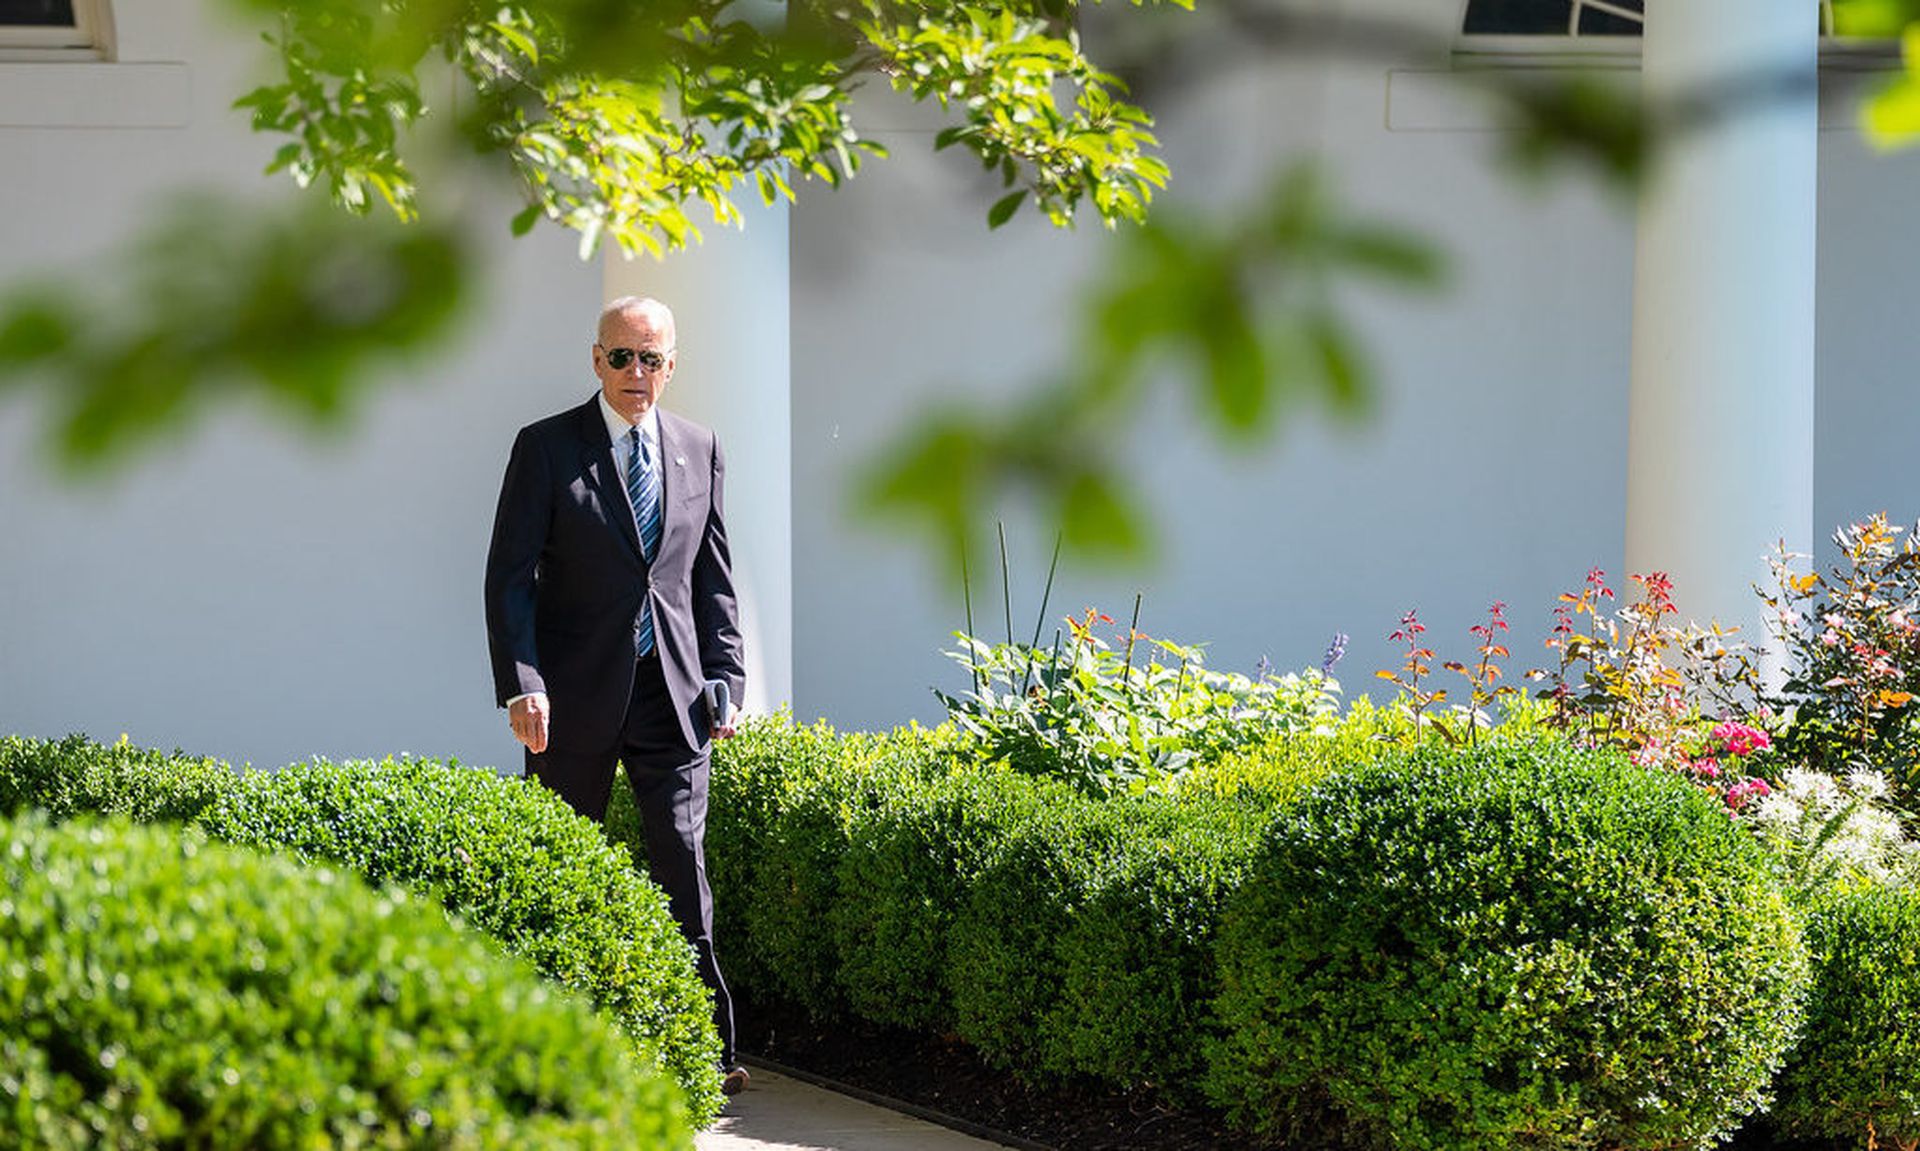 President Joe Biden walks through the Rose Garden of the White House, Wednesday, June 23, 2021, to the Oval Office. (Official White House Photo by Adam Schultz)